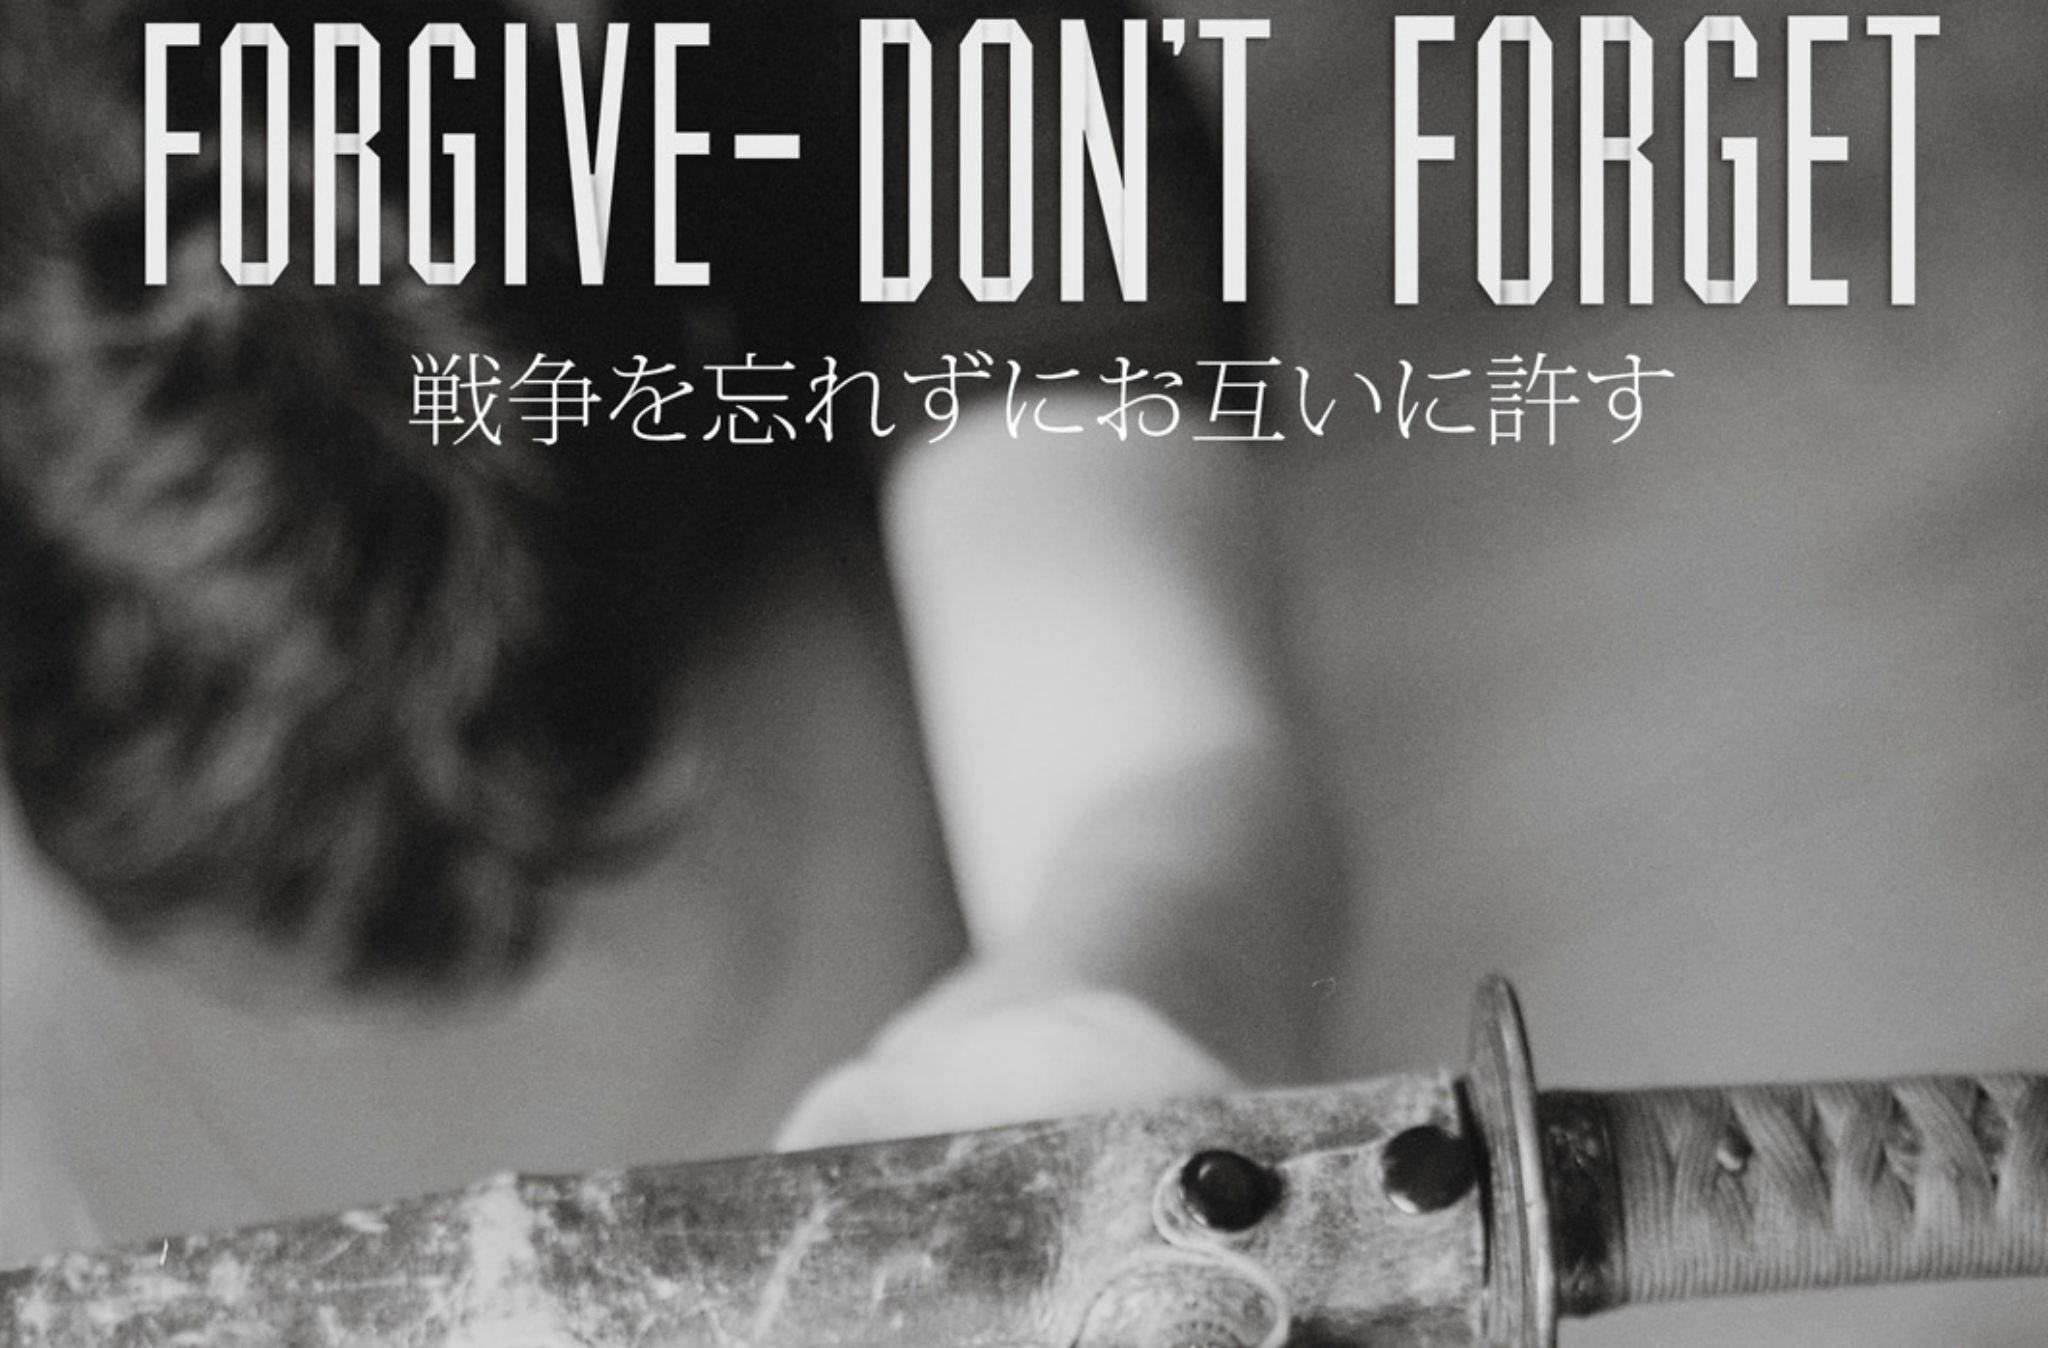 Film poster detail for Forgive--Don't Forget